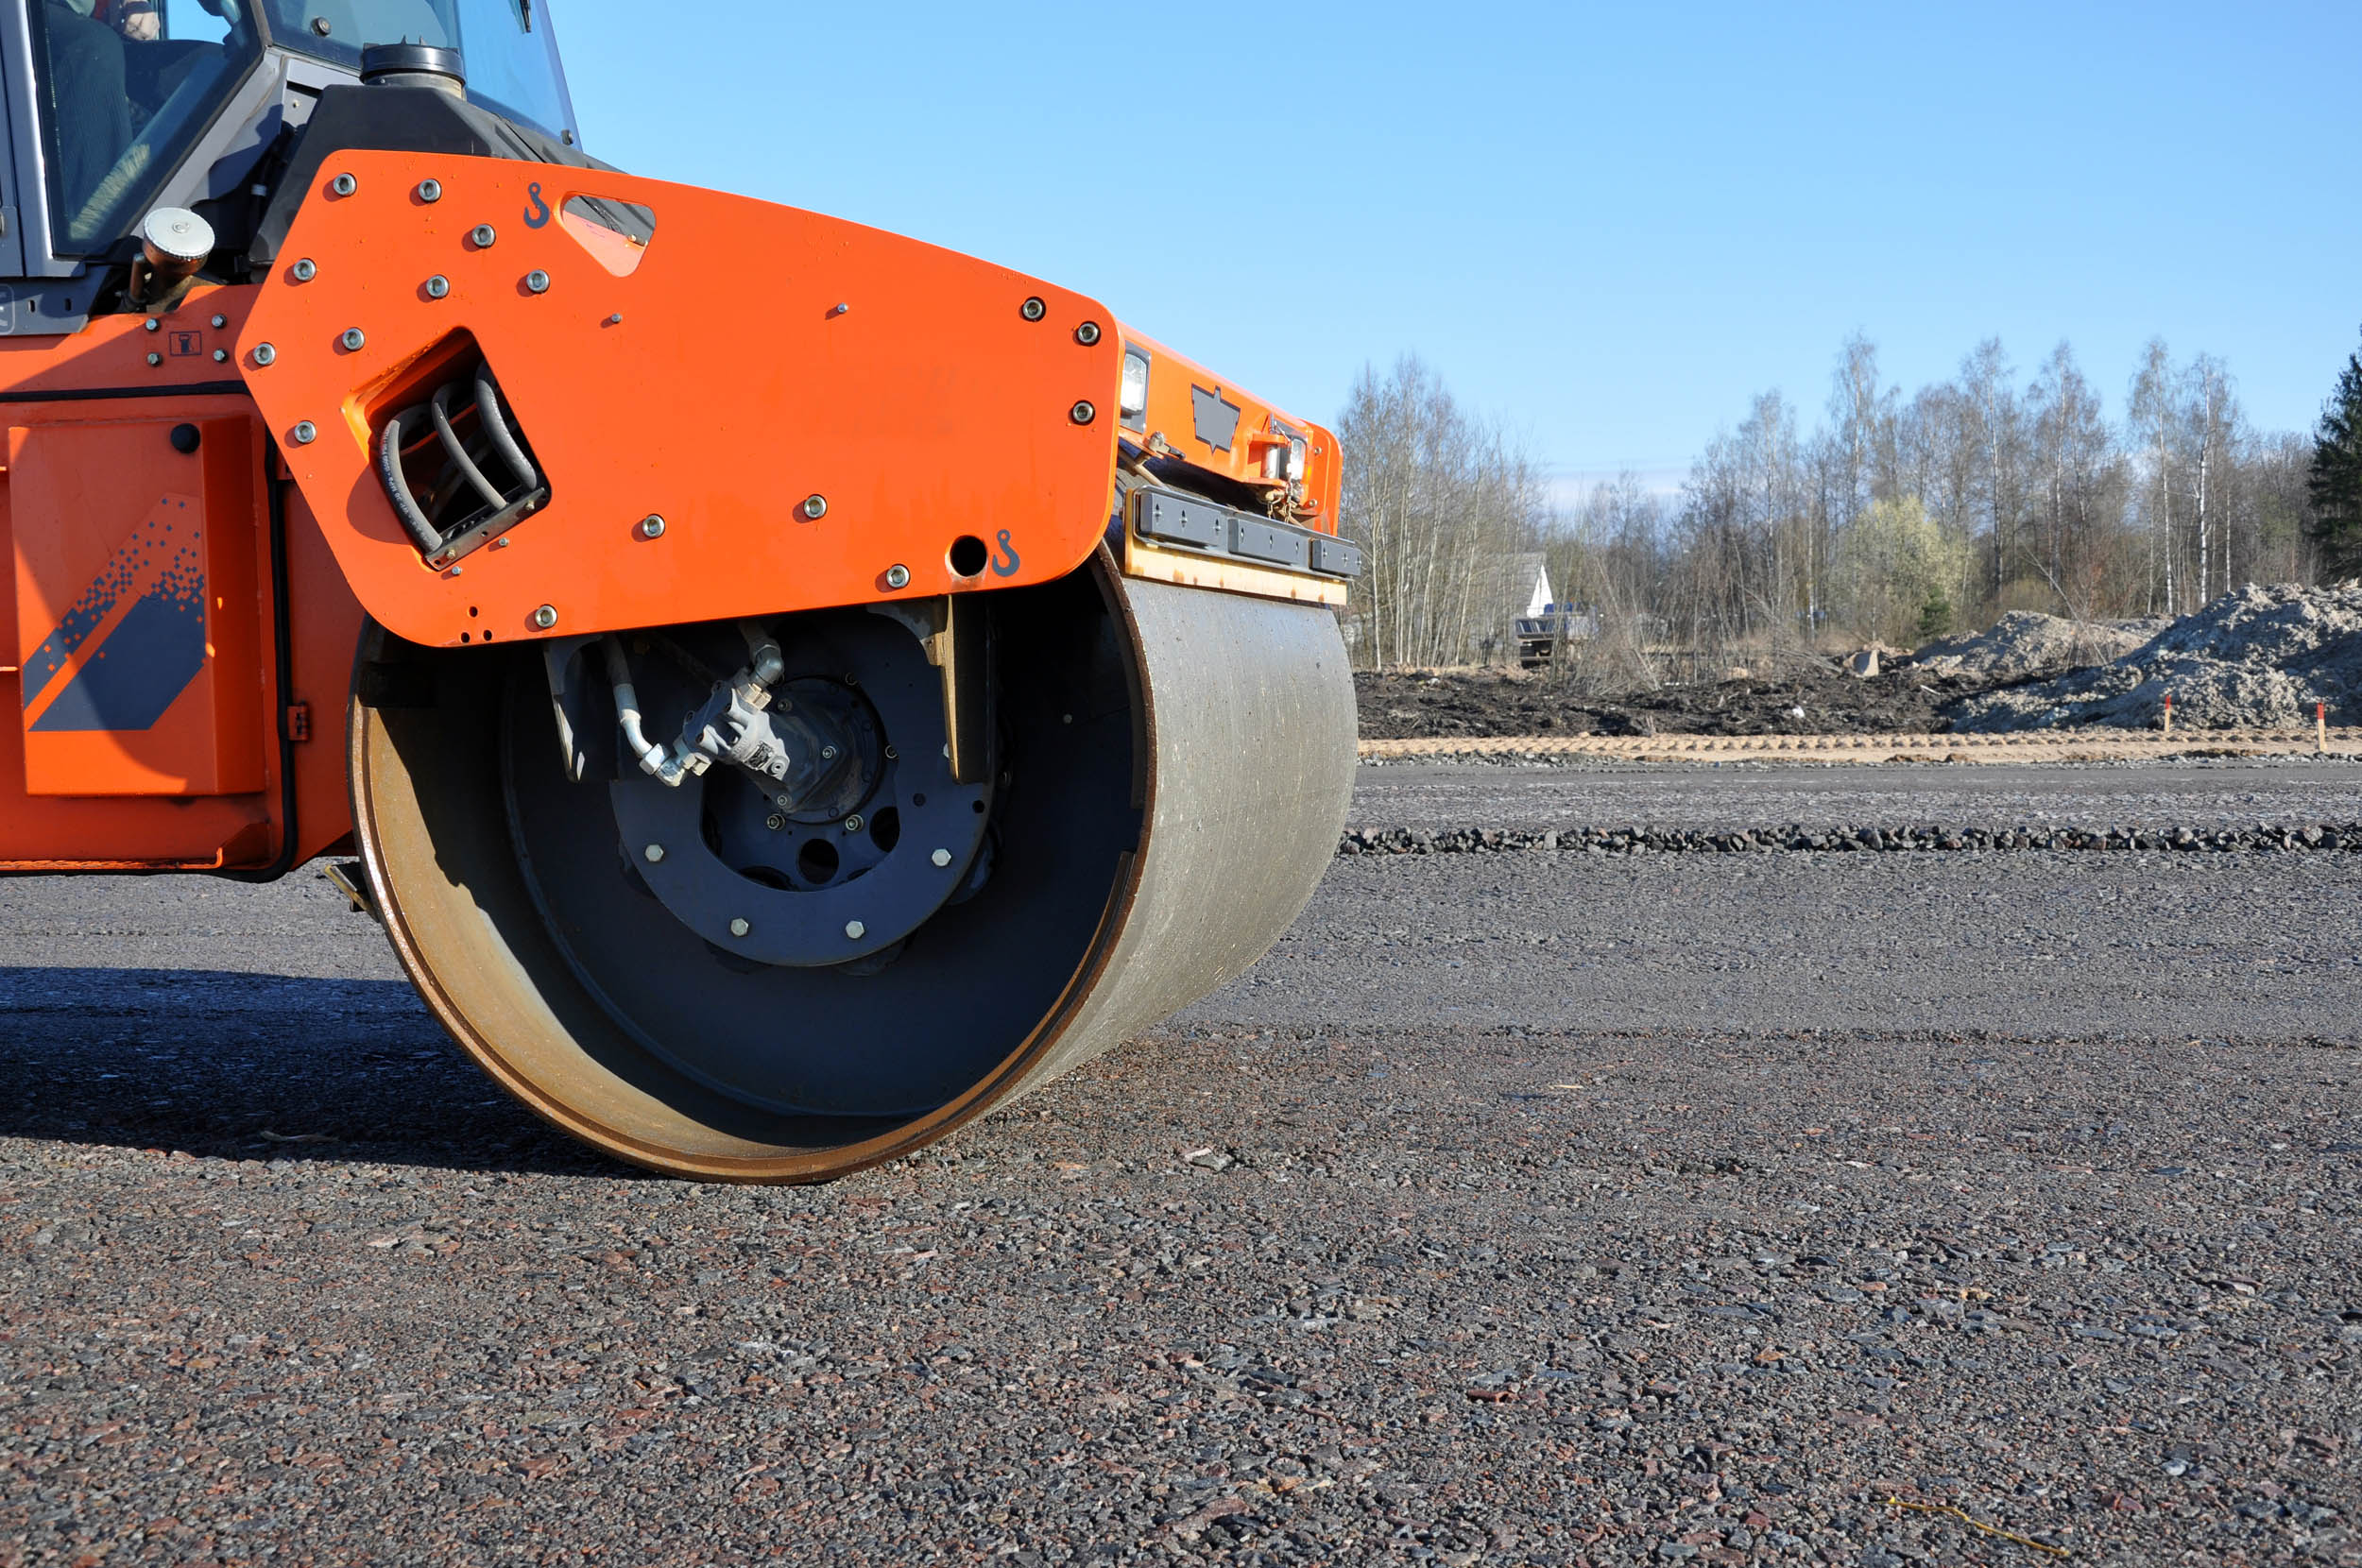 Paving repairs on I-65 northbound in Jefferson County planned